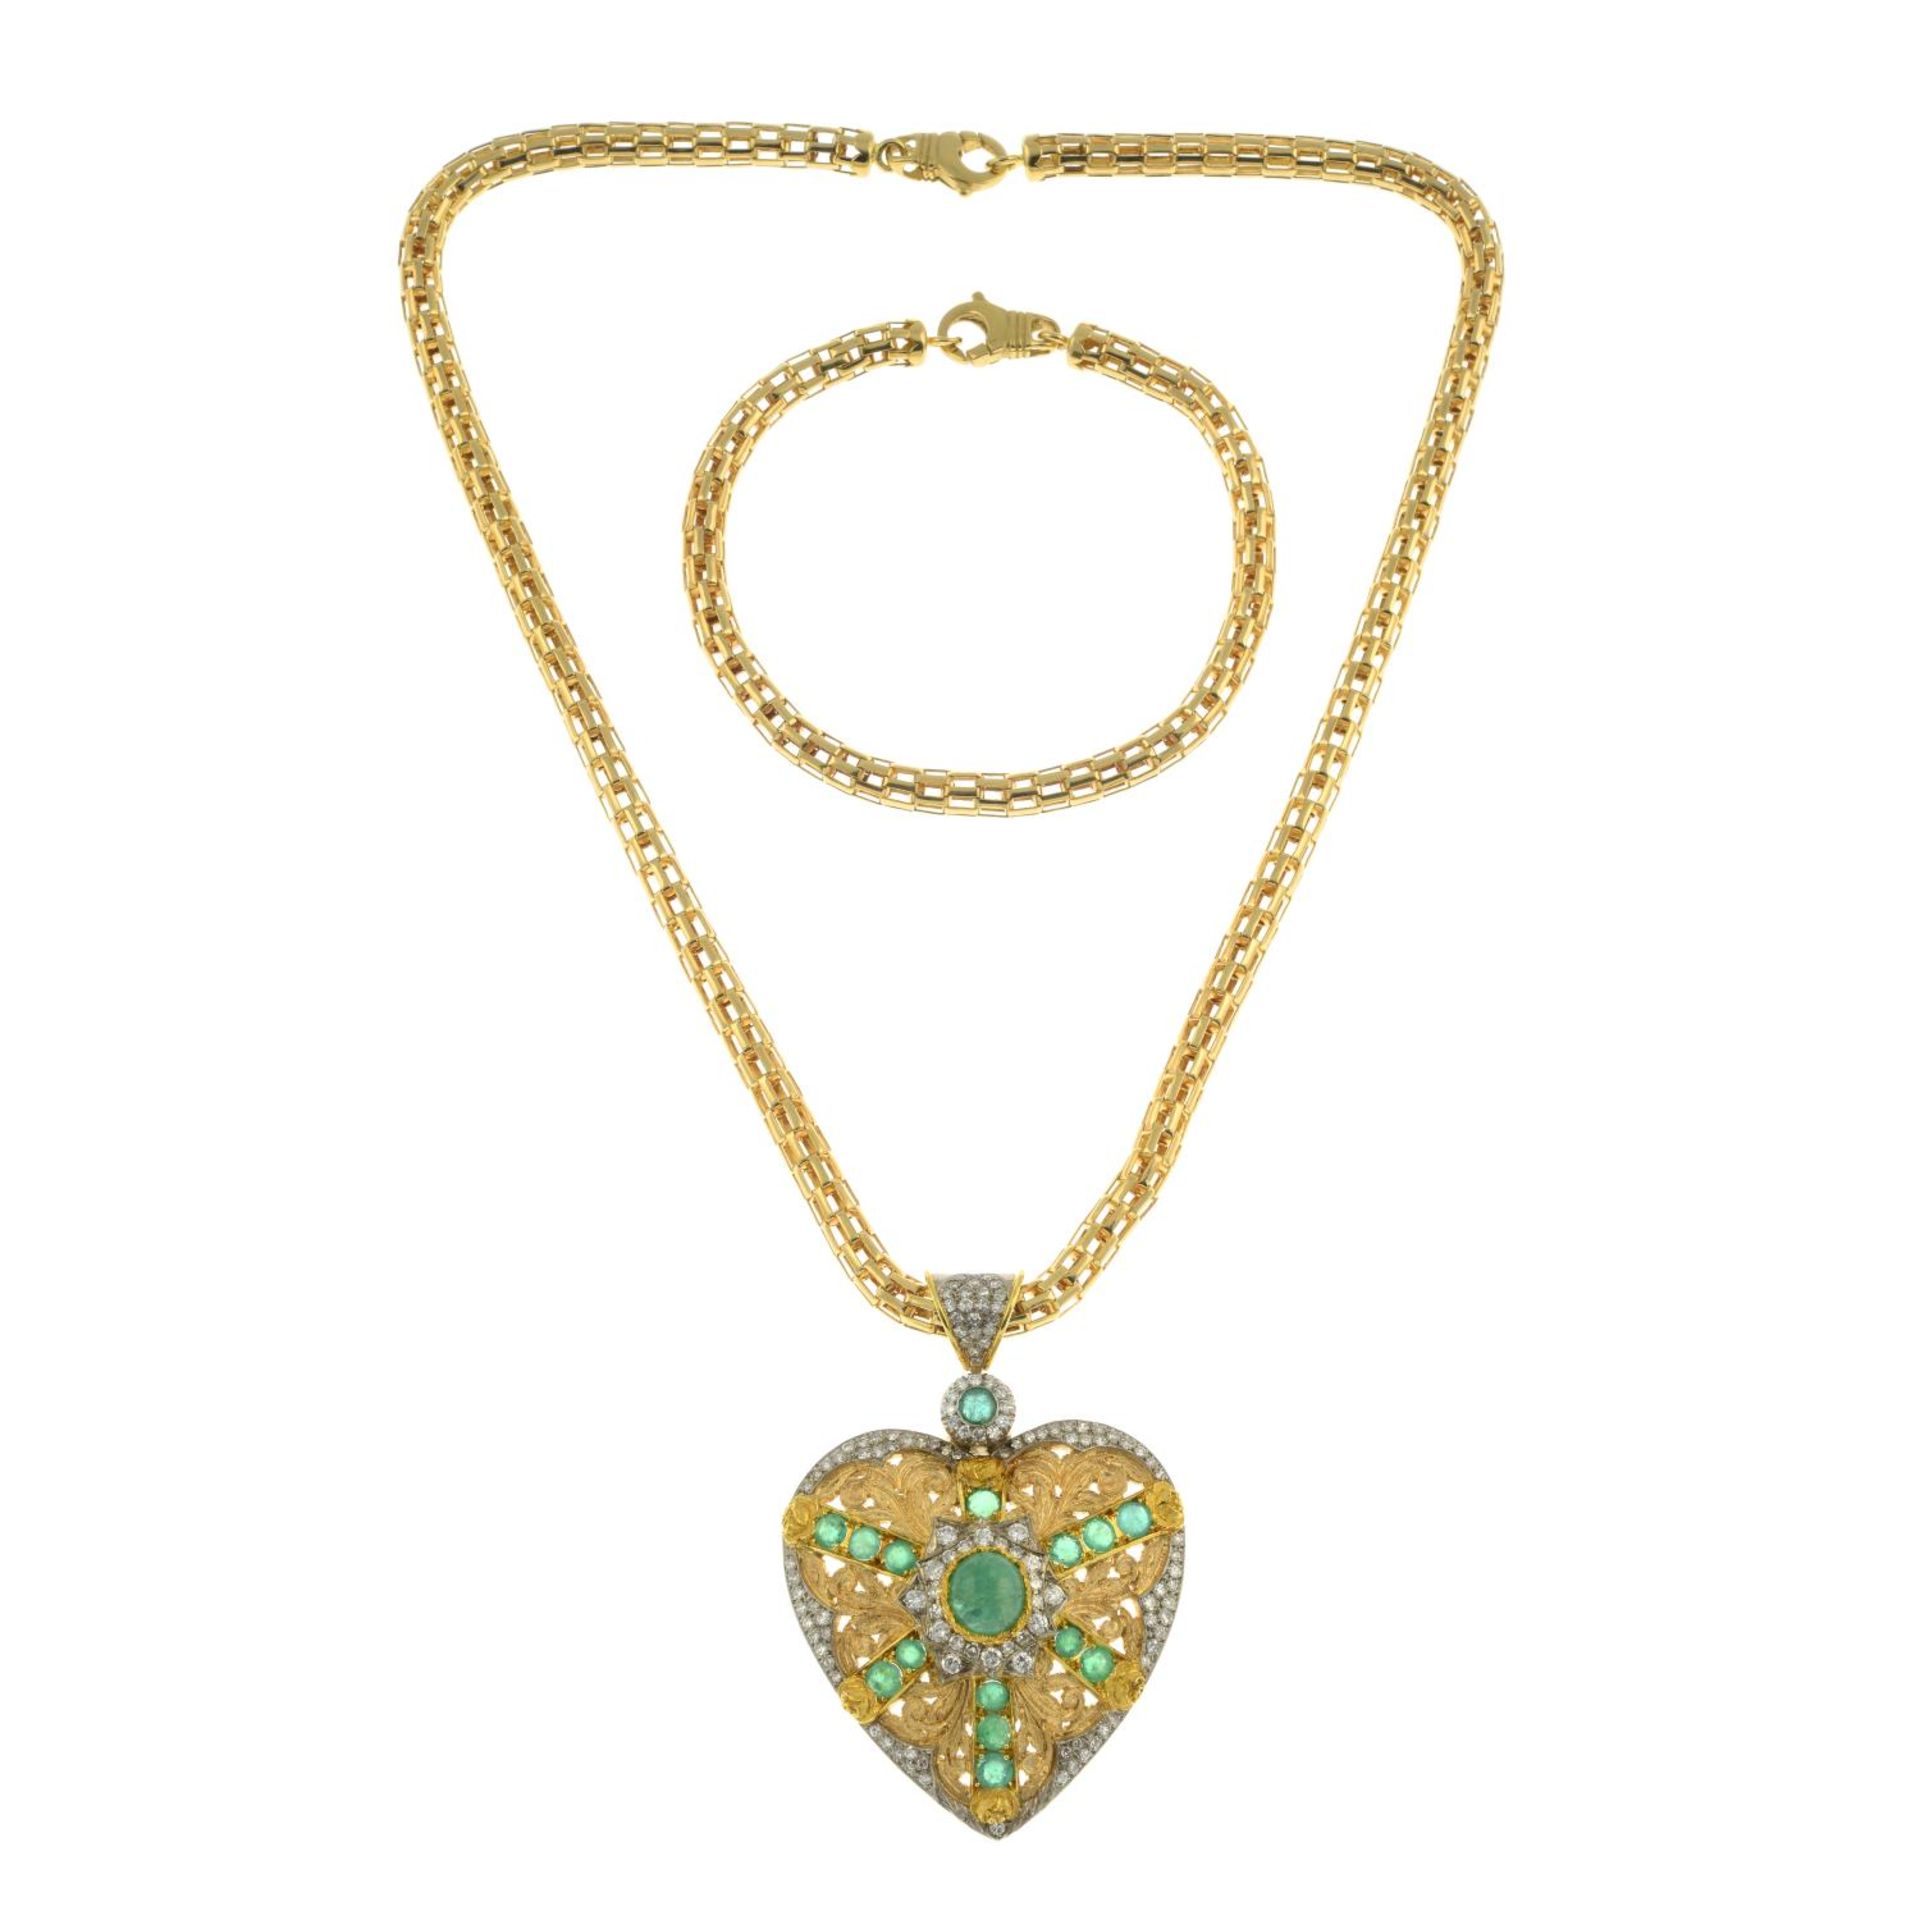 An emerald and diamond heart pendant, with fancy-link chain. - Image 7 of 8